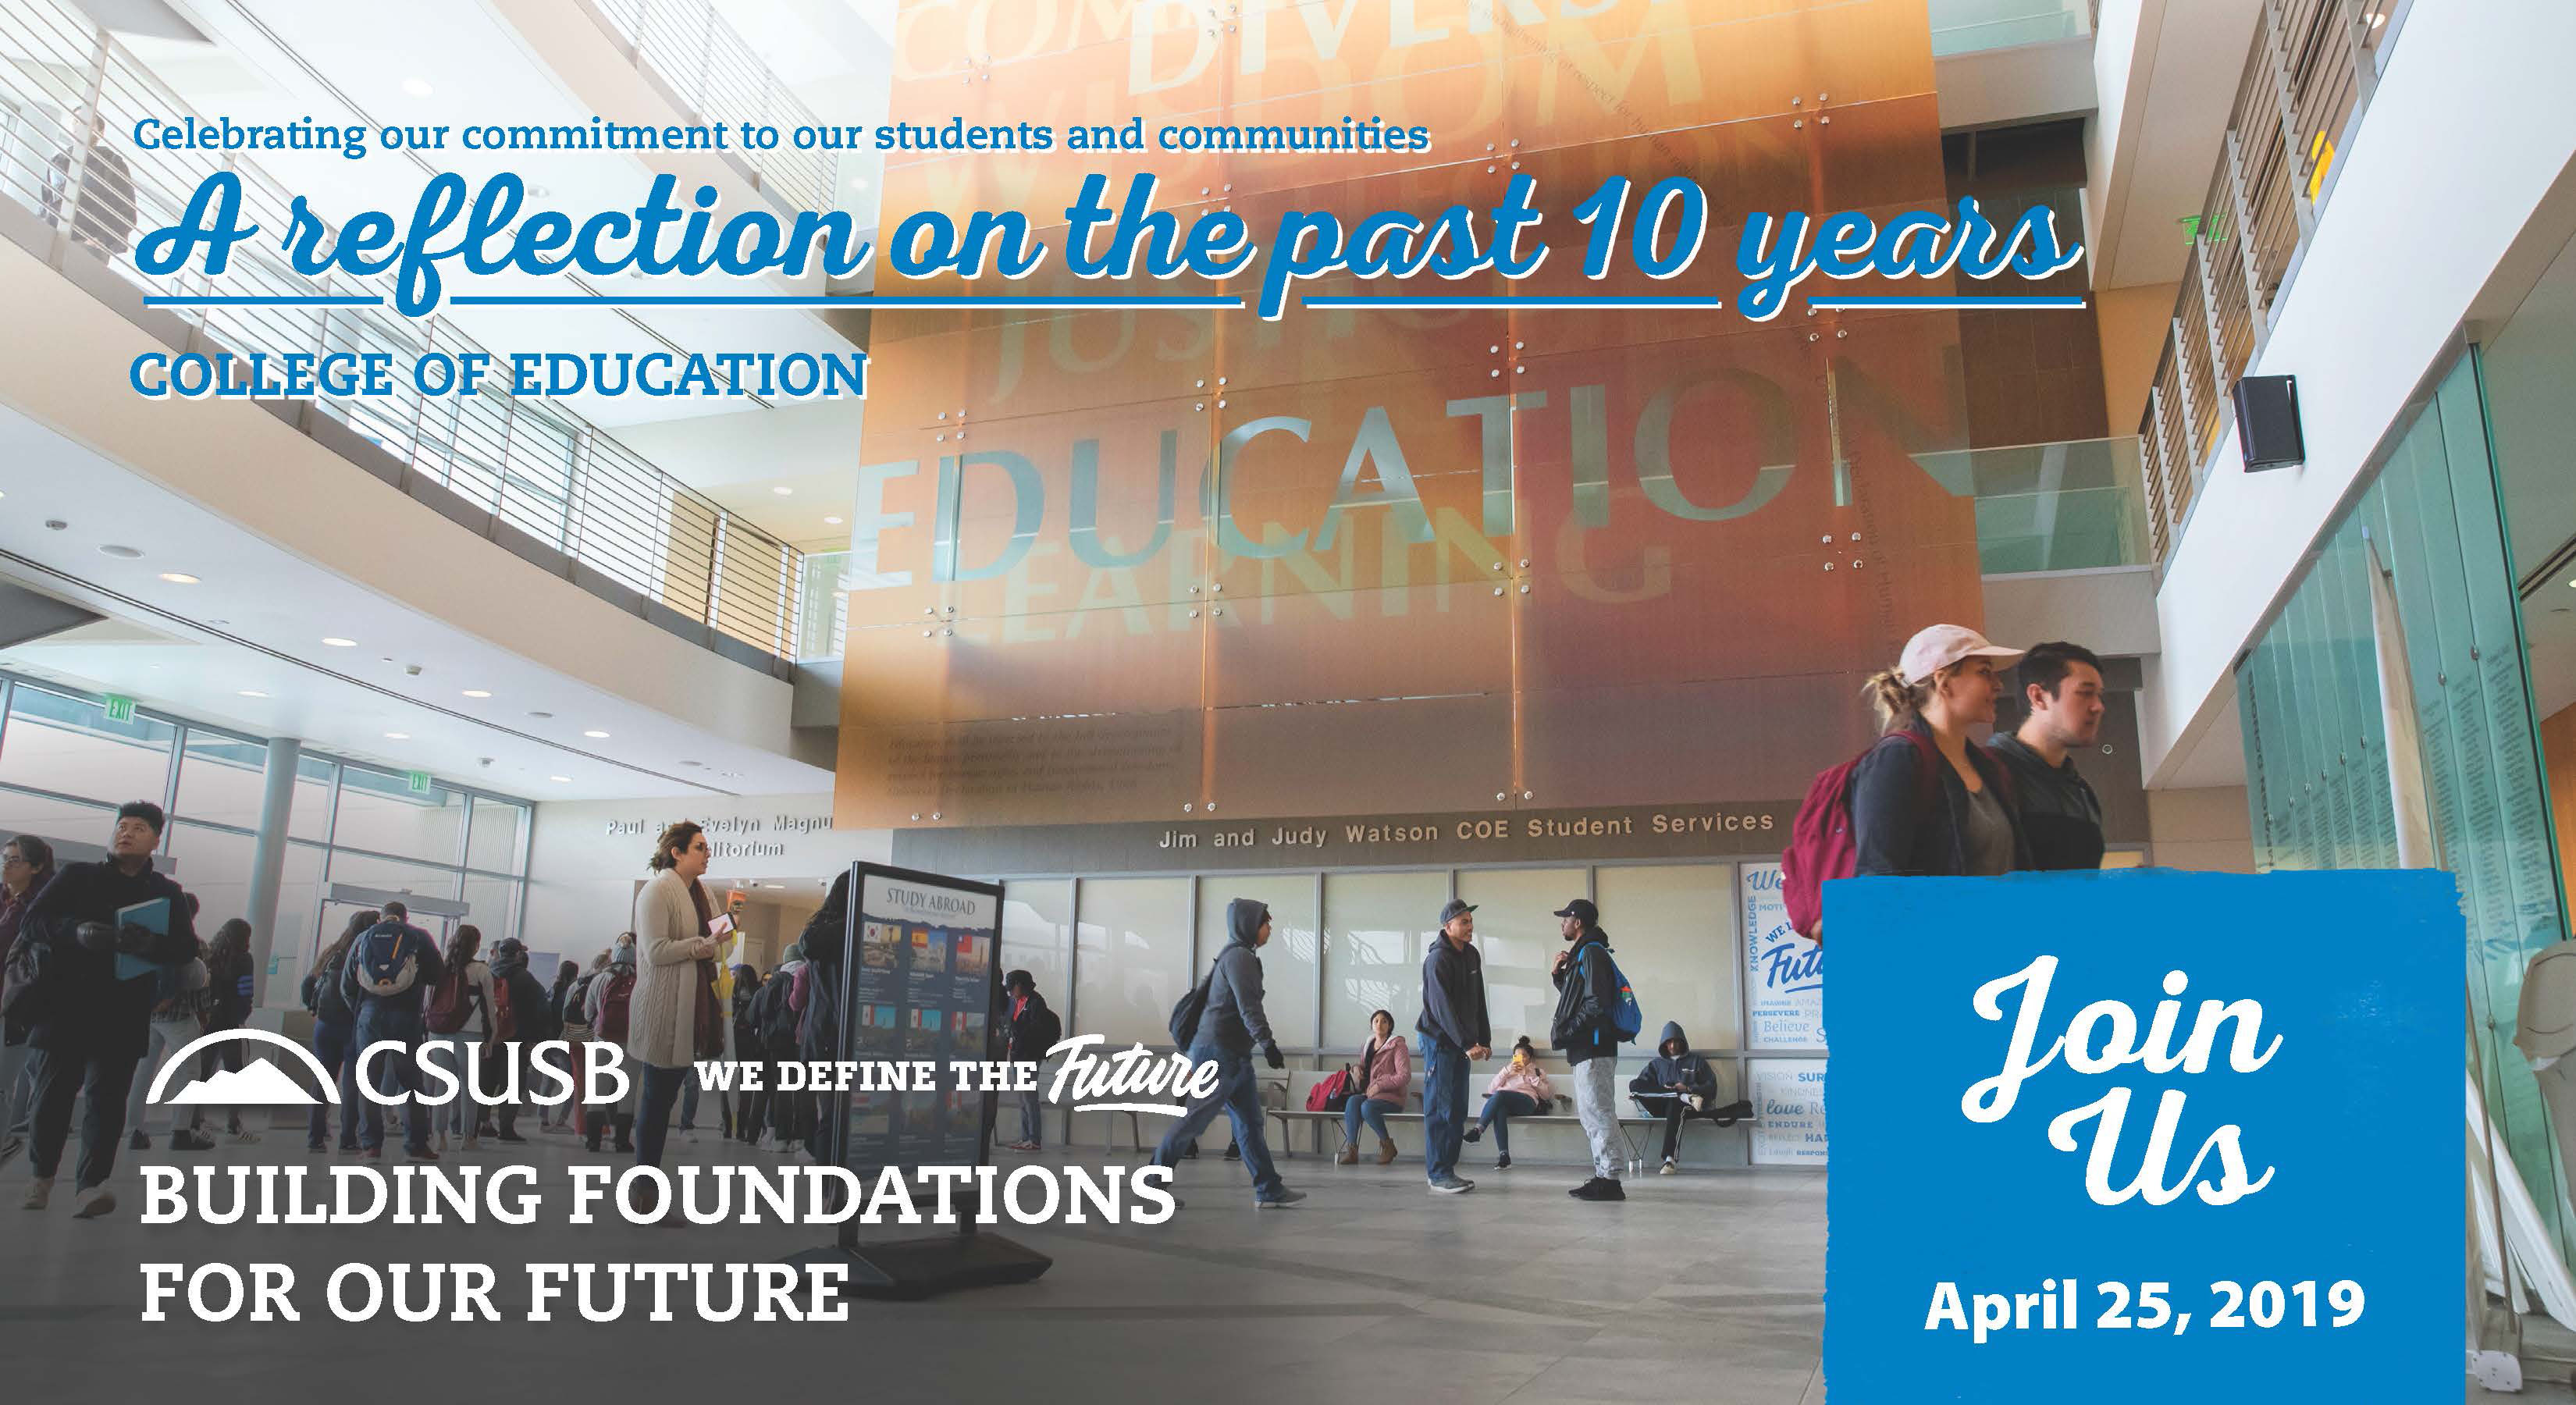 CSUSB College of Education hosts open house on April 25